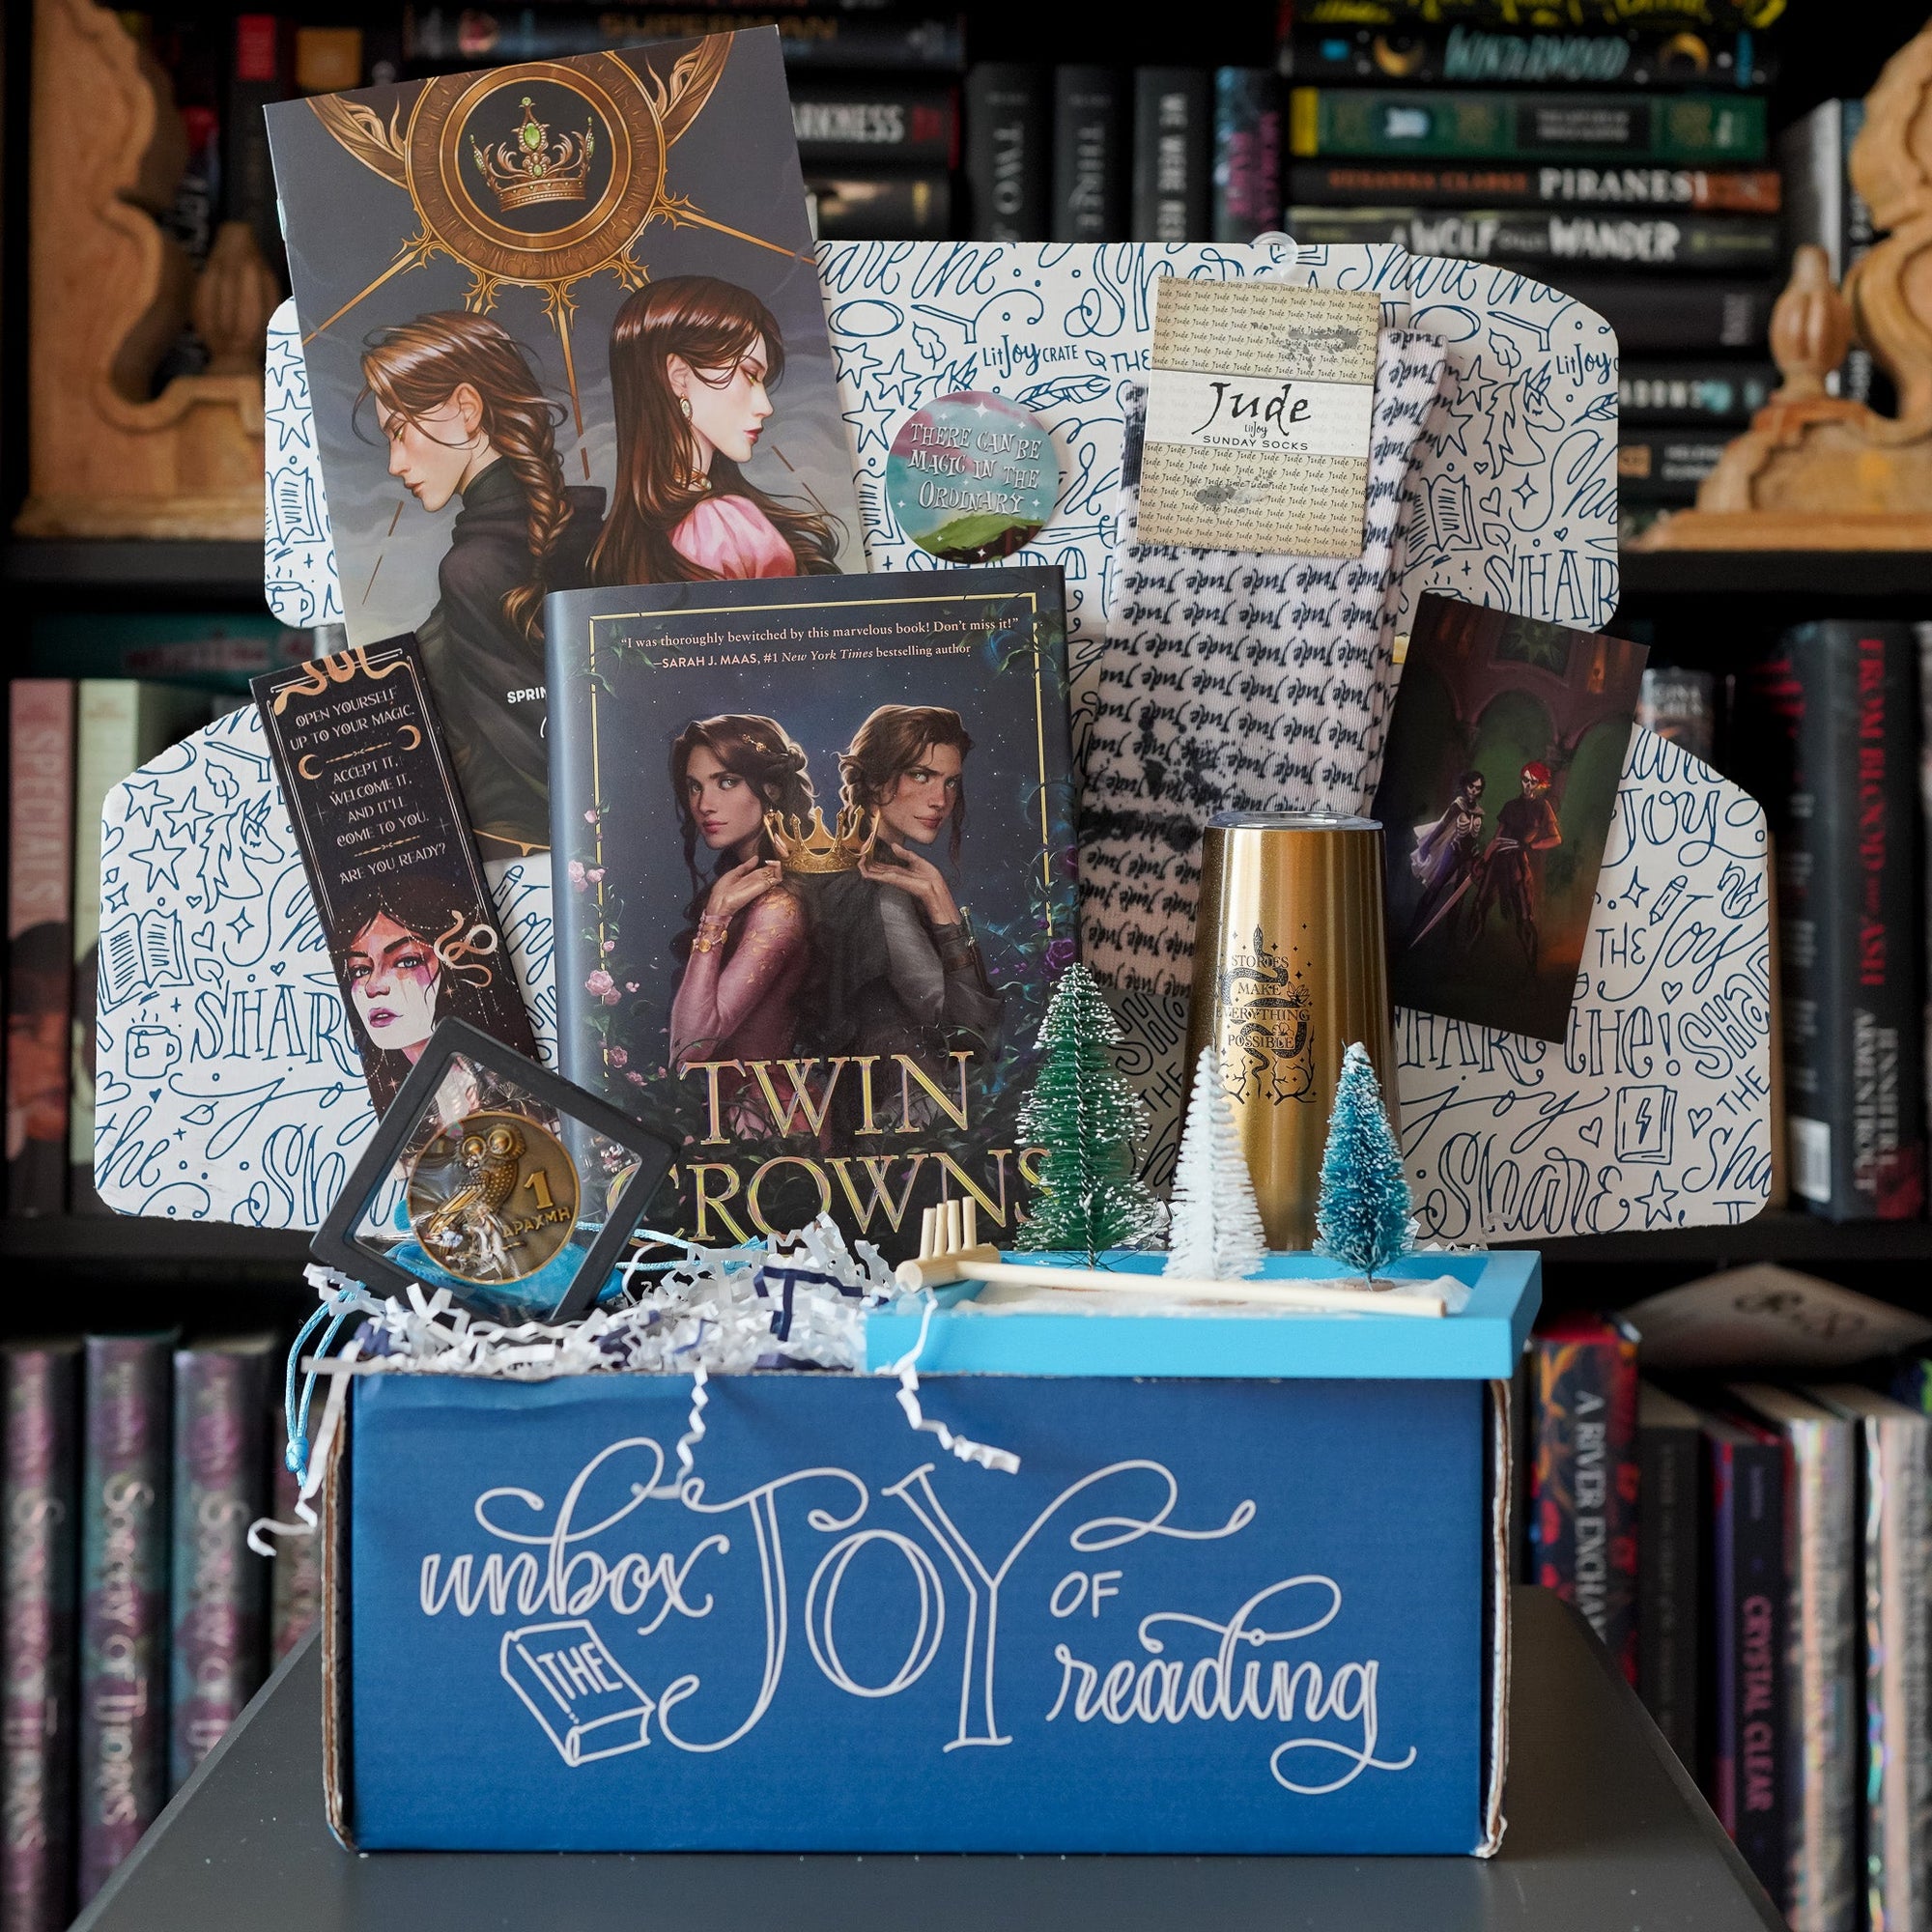 Magic Awakens Crate comes with Twin Crowns, gold wine tumbler, zen garden, collector's coin, and Jude socks